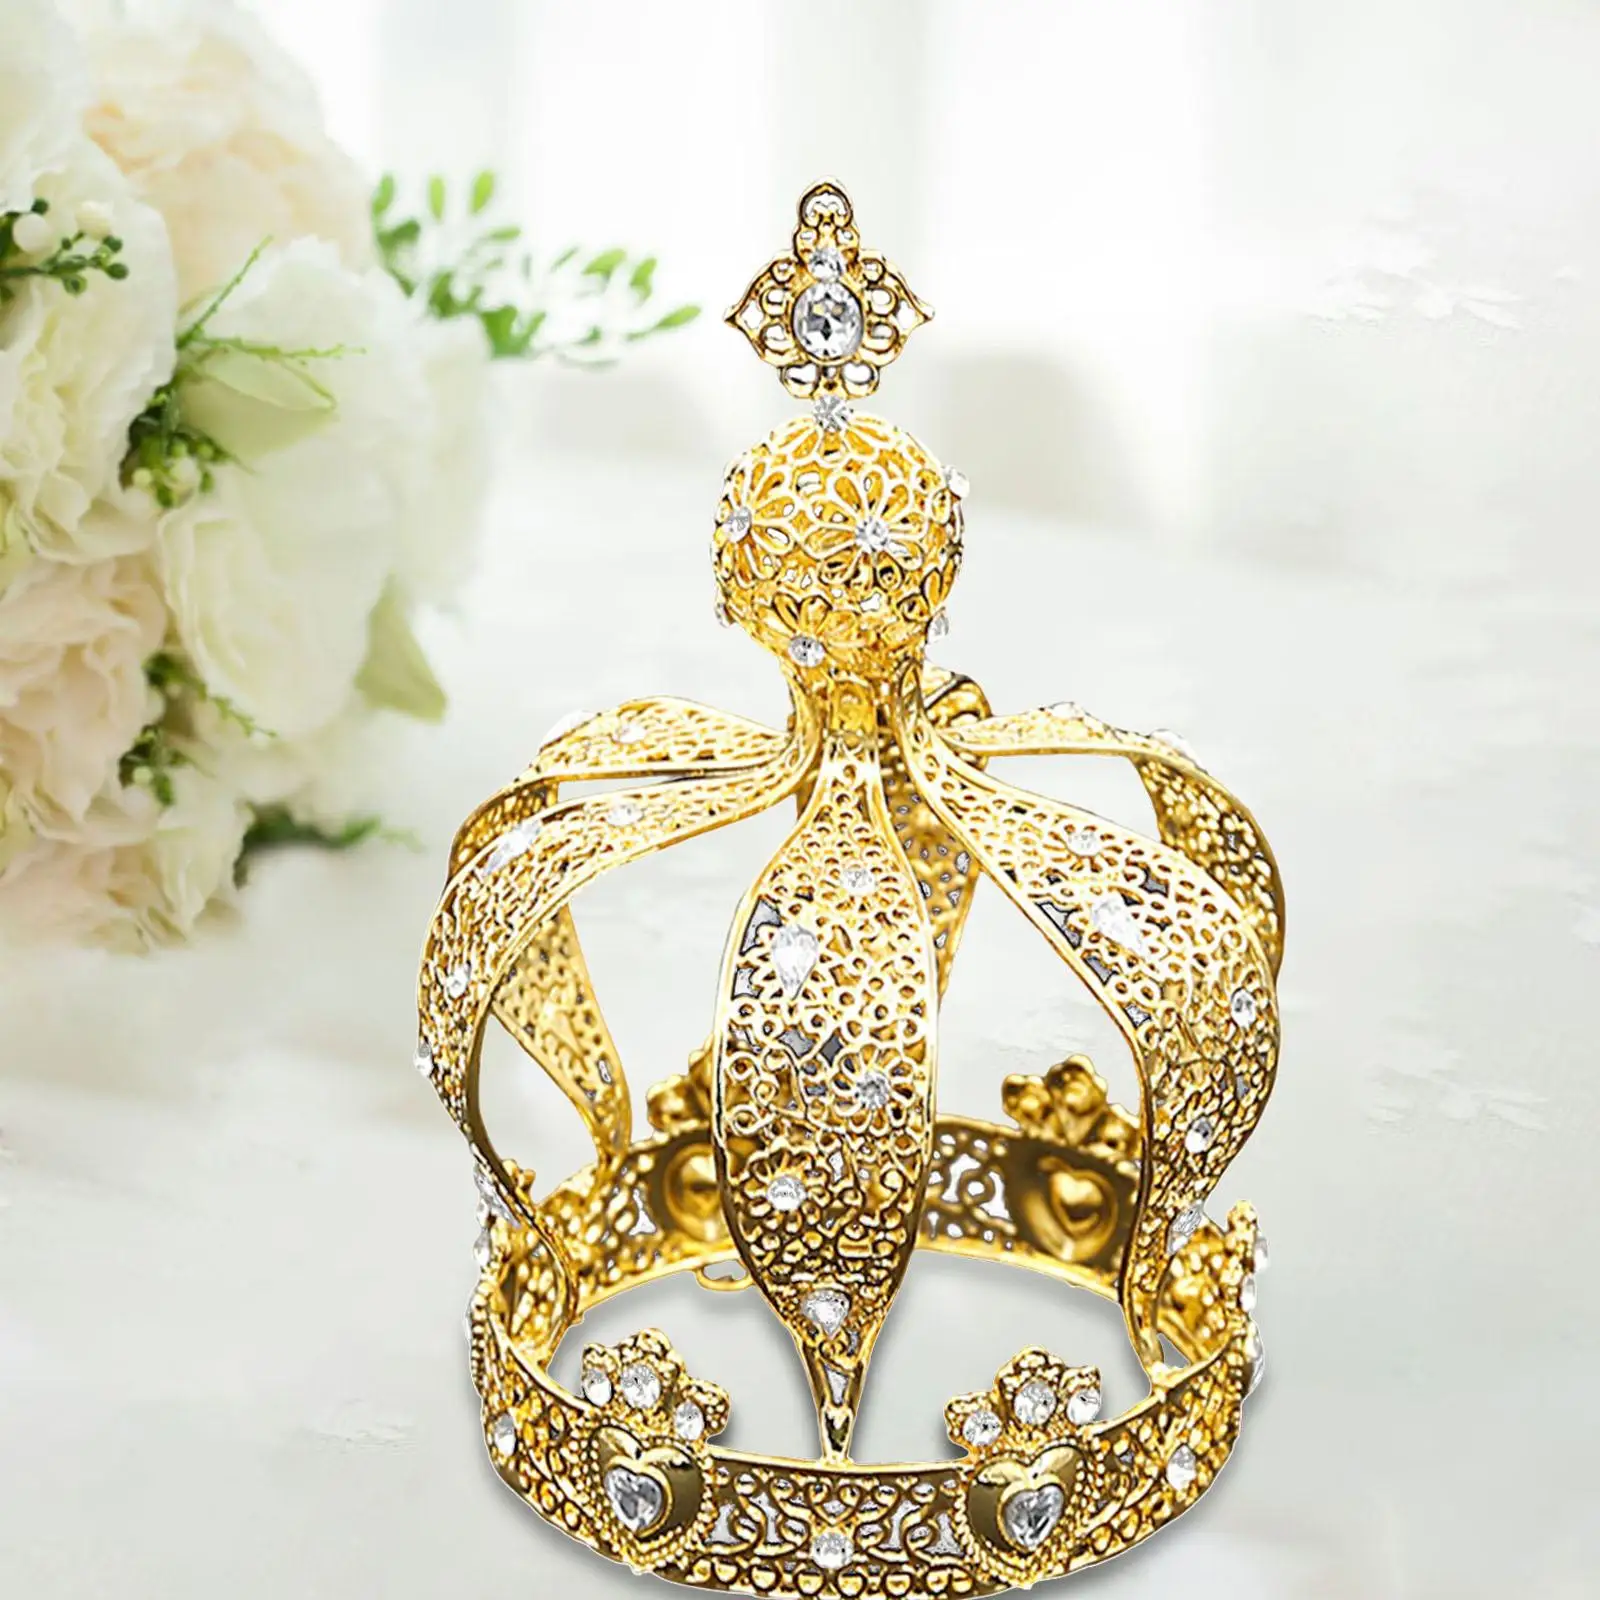 Crown Cake Topper Cupcake Decoration Alloy Cake Ornament Headpieces for Birthday Party Themed Parties Anniversaries Wedding Prom